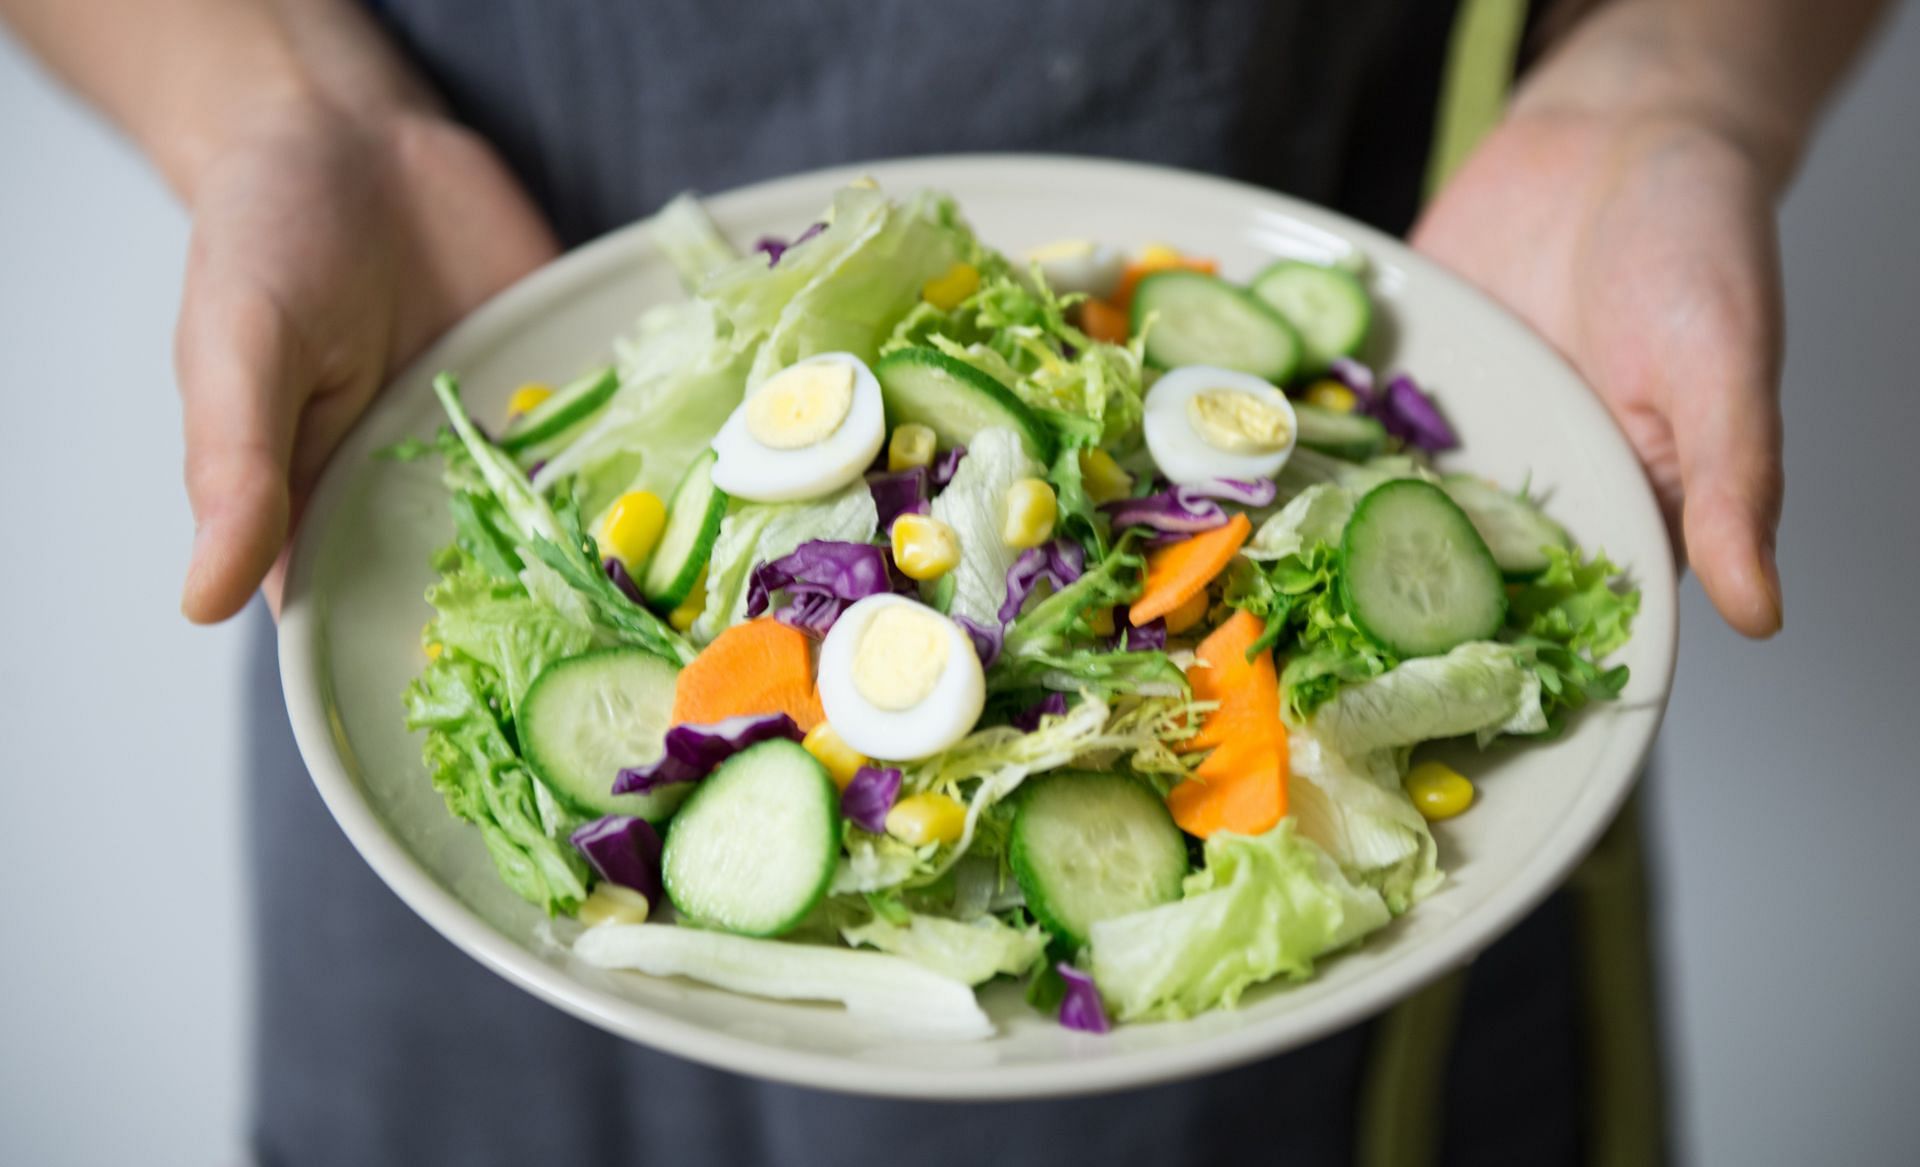 Eat a variety of salads to get all the leafy greens your body needs (Image via Pexels @Cats Coming)